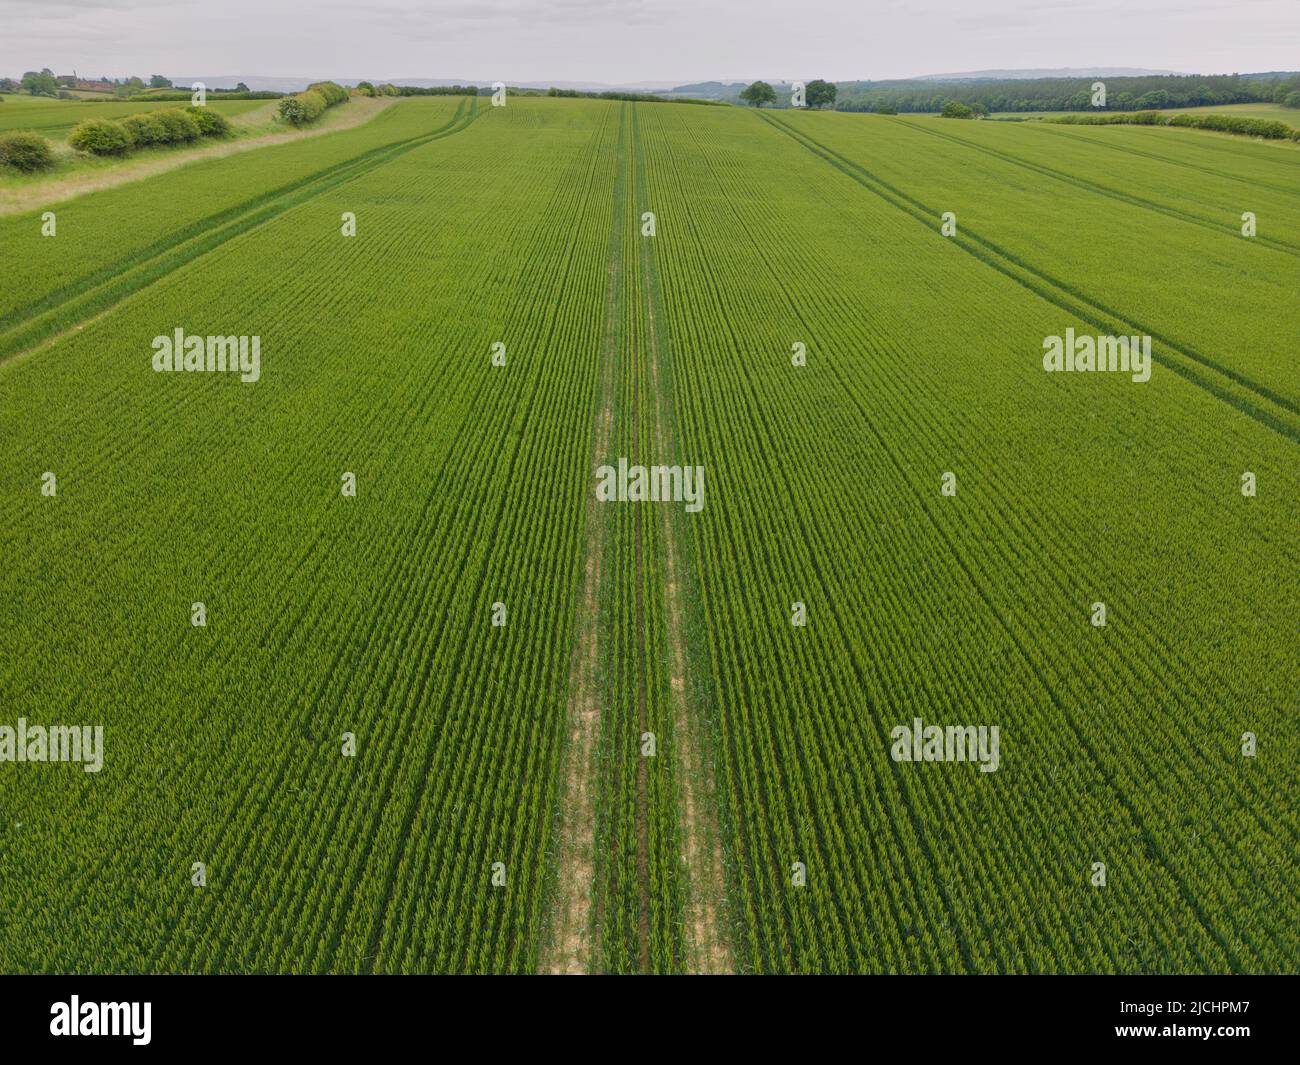 Tractor tracks in a lush green field of Wheat crop seen from the air, Warwickshire, England. Stock Photo